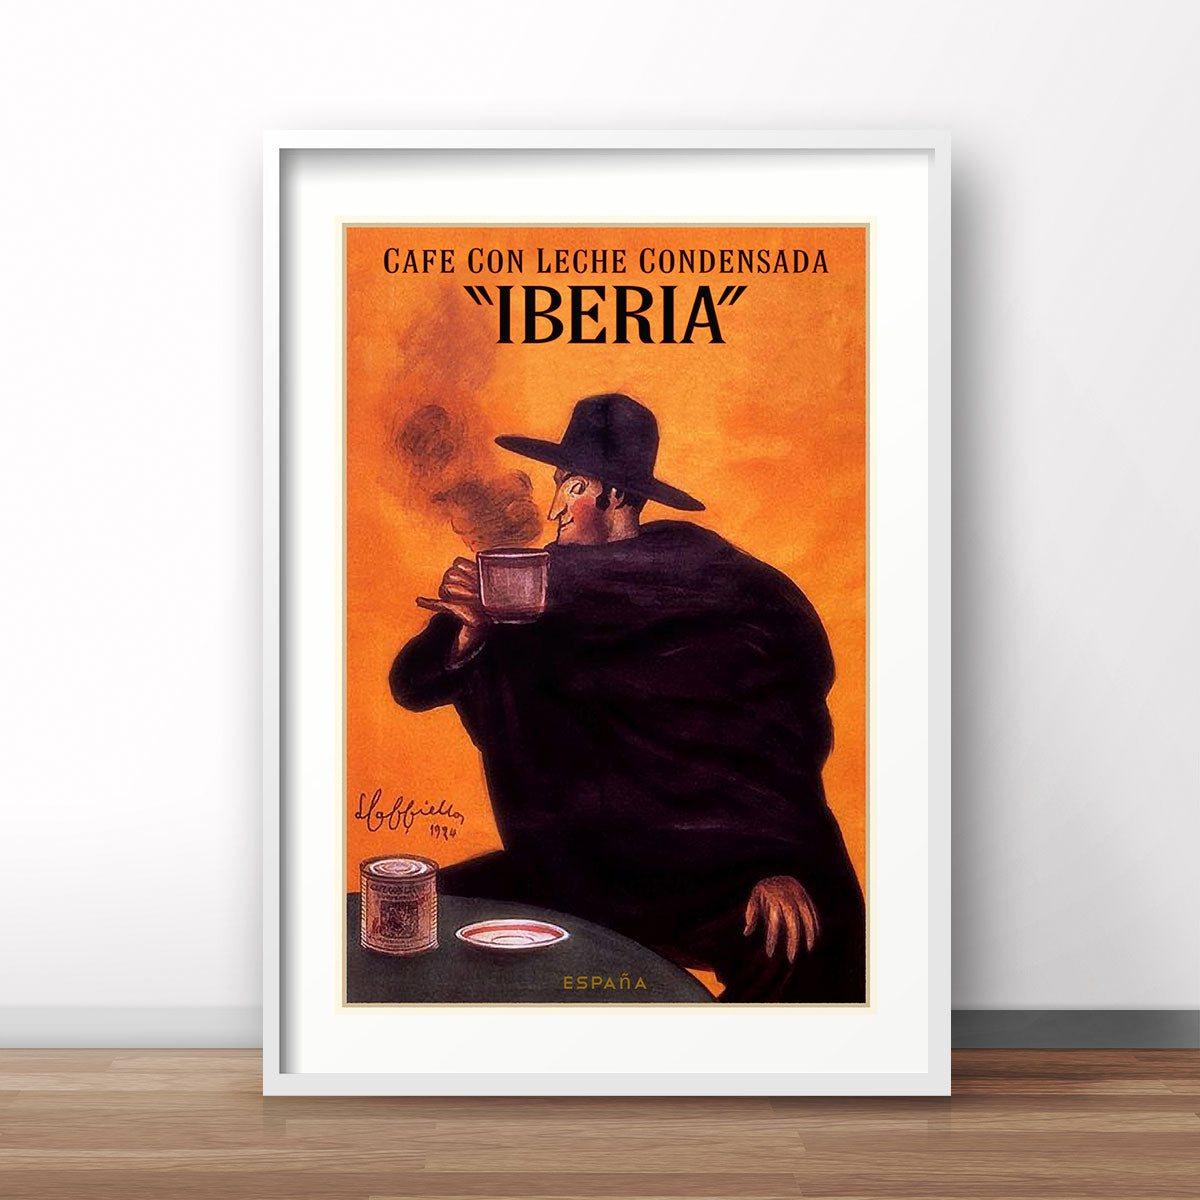 Iberia cafe con Leche vintage retro poster print from Places We Luv